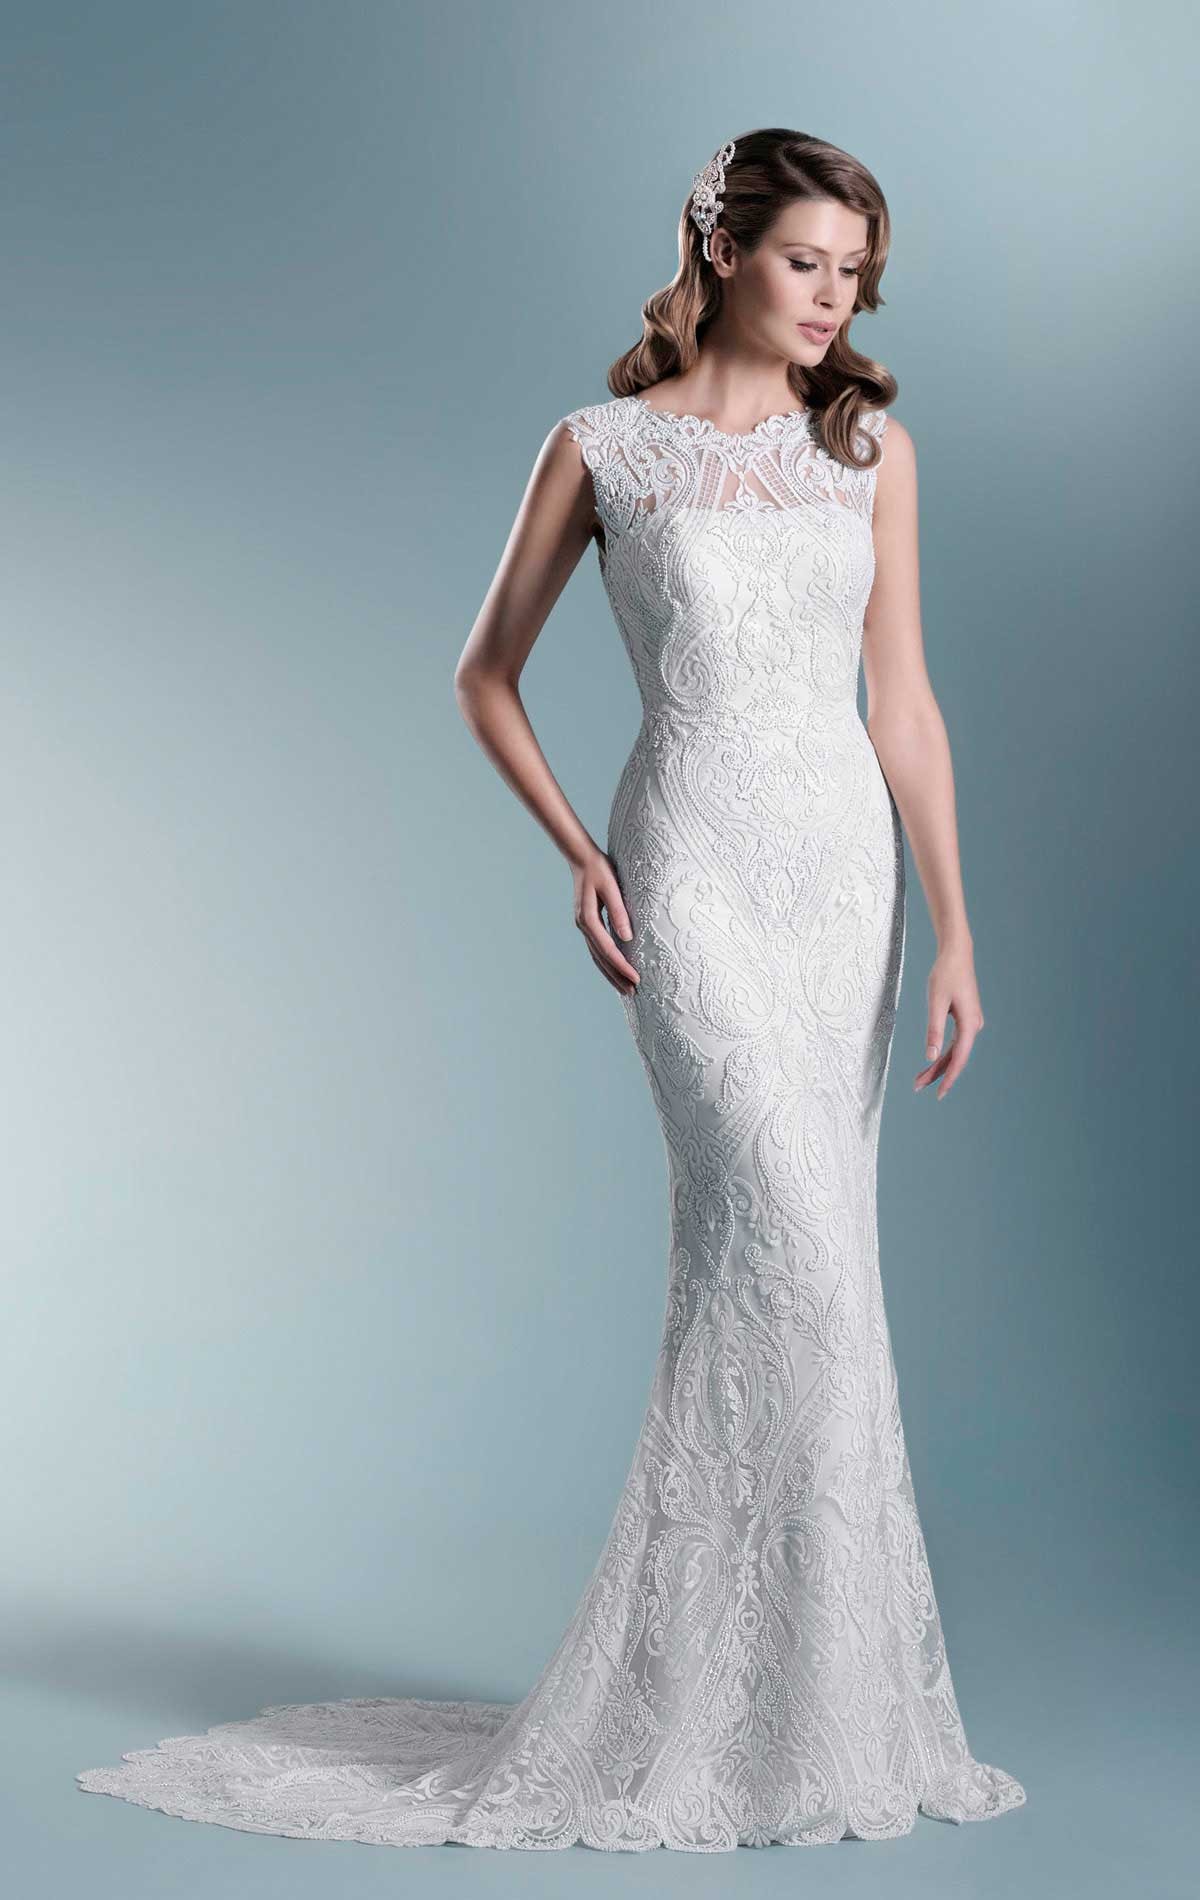 Madeleine - Size 12 - Agnes Bridal- The One TO777, Beautiful Beaded Lace 1940's look Wedding Dress with Low Illusion back & small Puddle Train at Blessings Wedding Dress Boutique, Brighton E.Sussex. BN1 5GG Telephone: 01273 505766